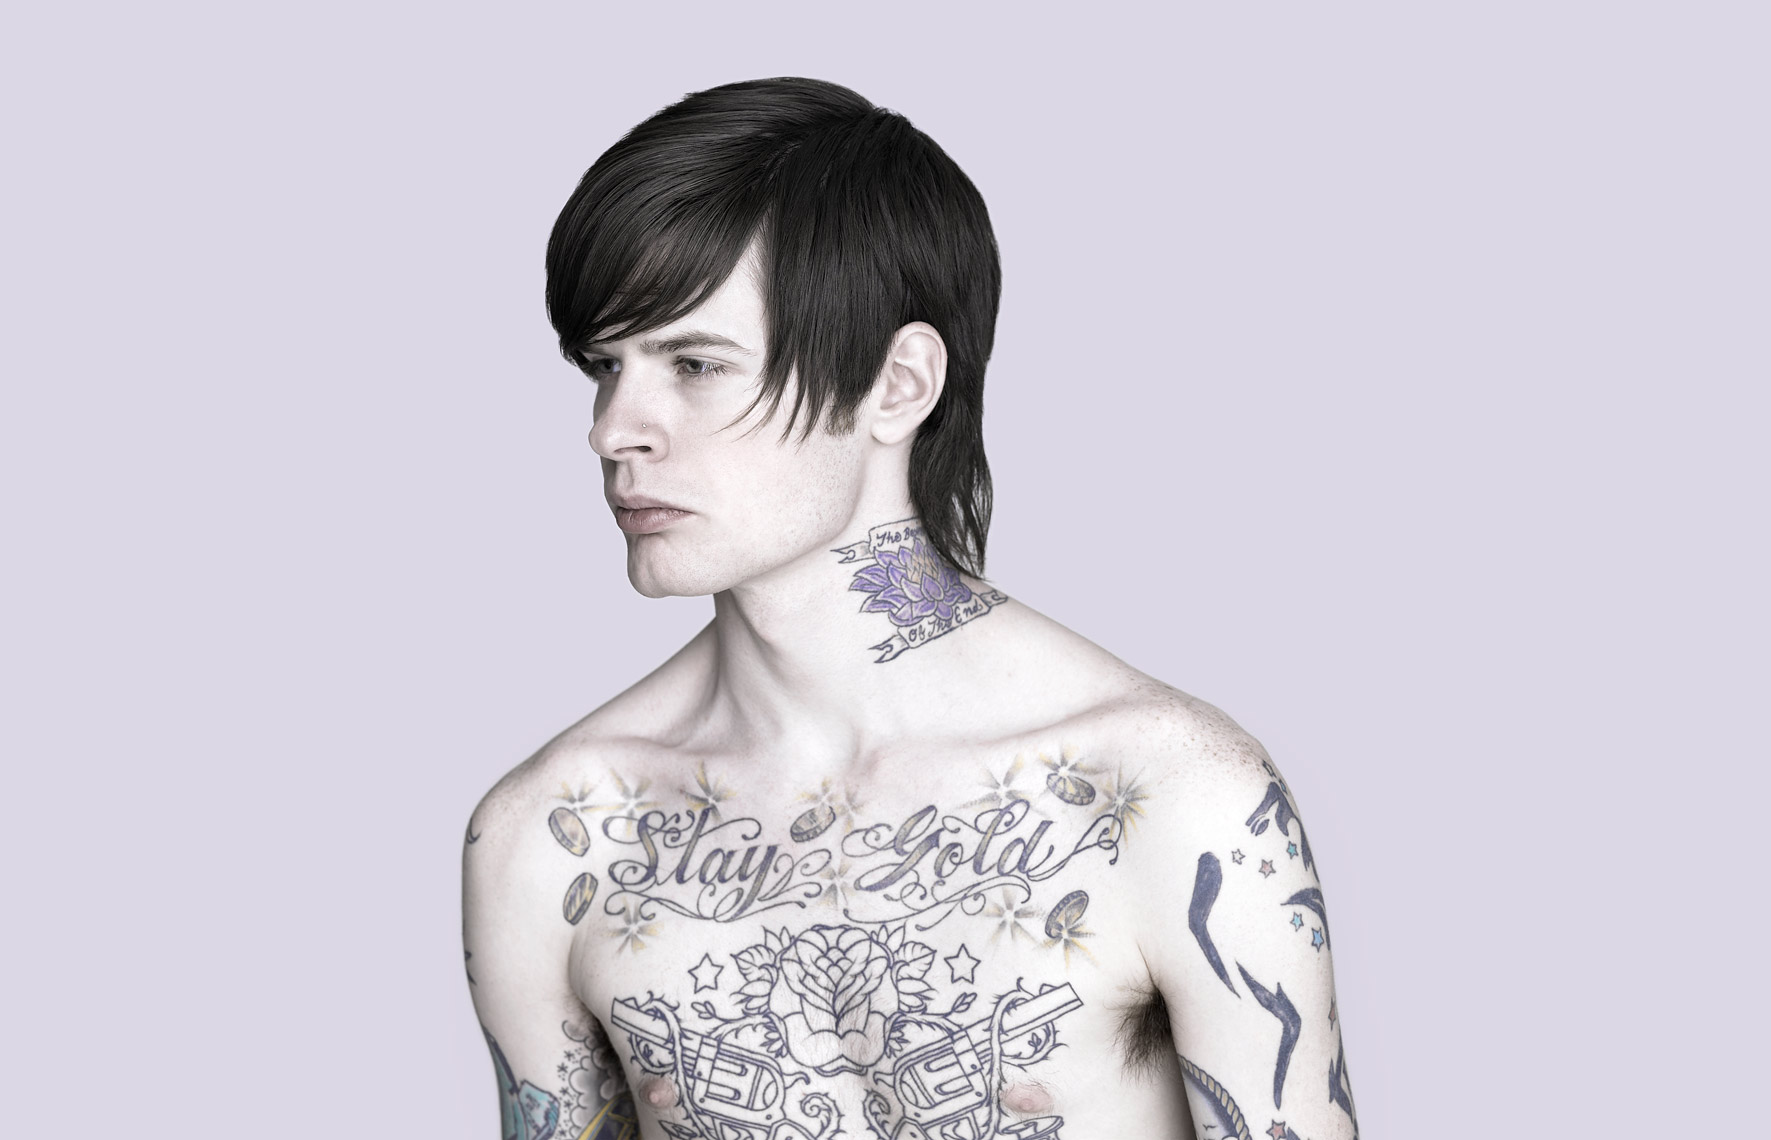 Studio portrait of a young man with tattoos